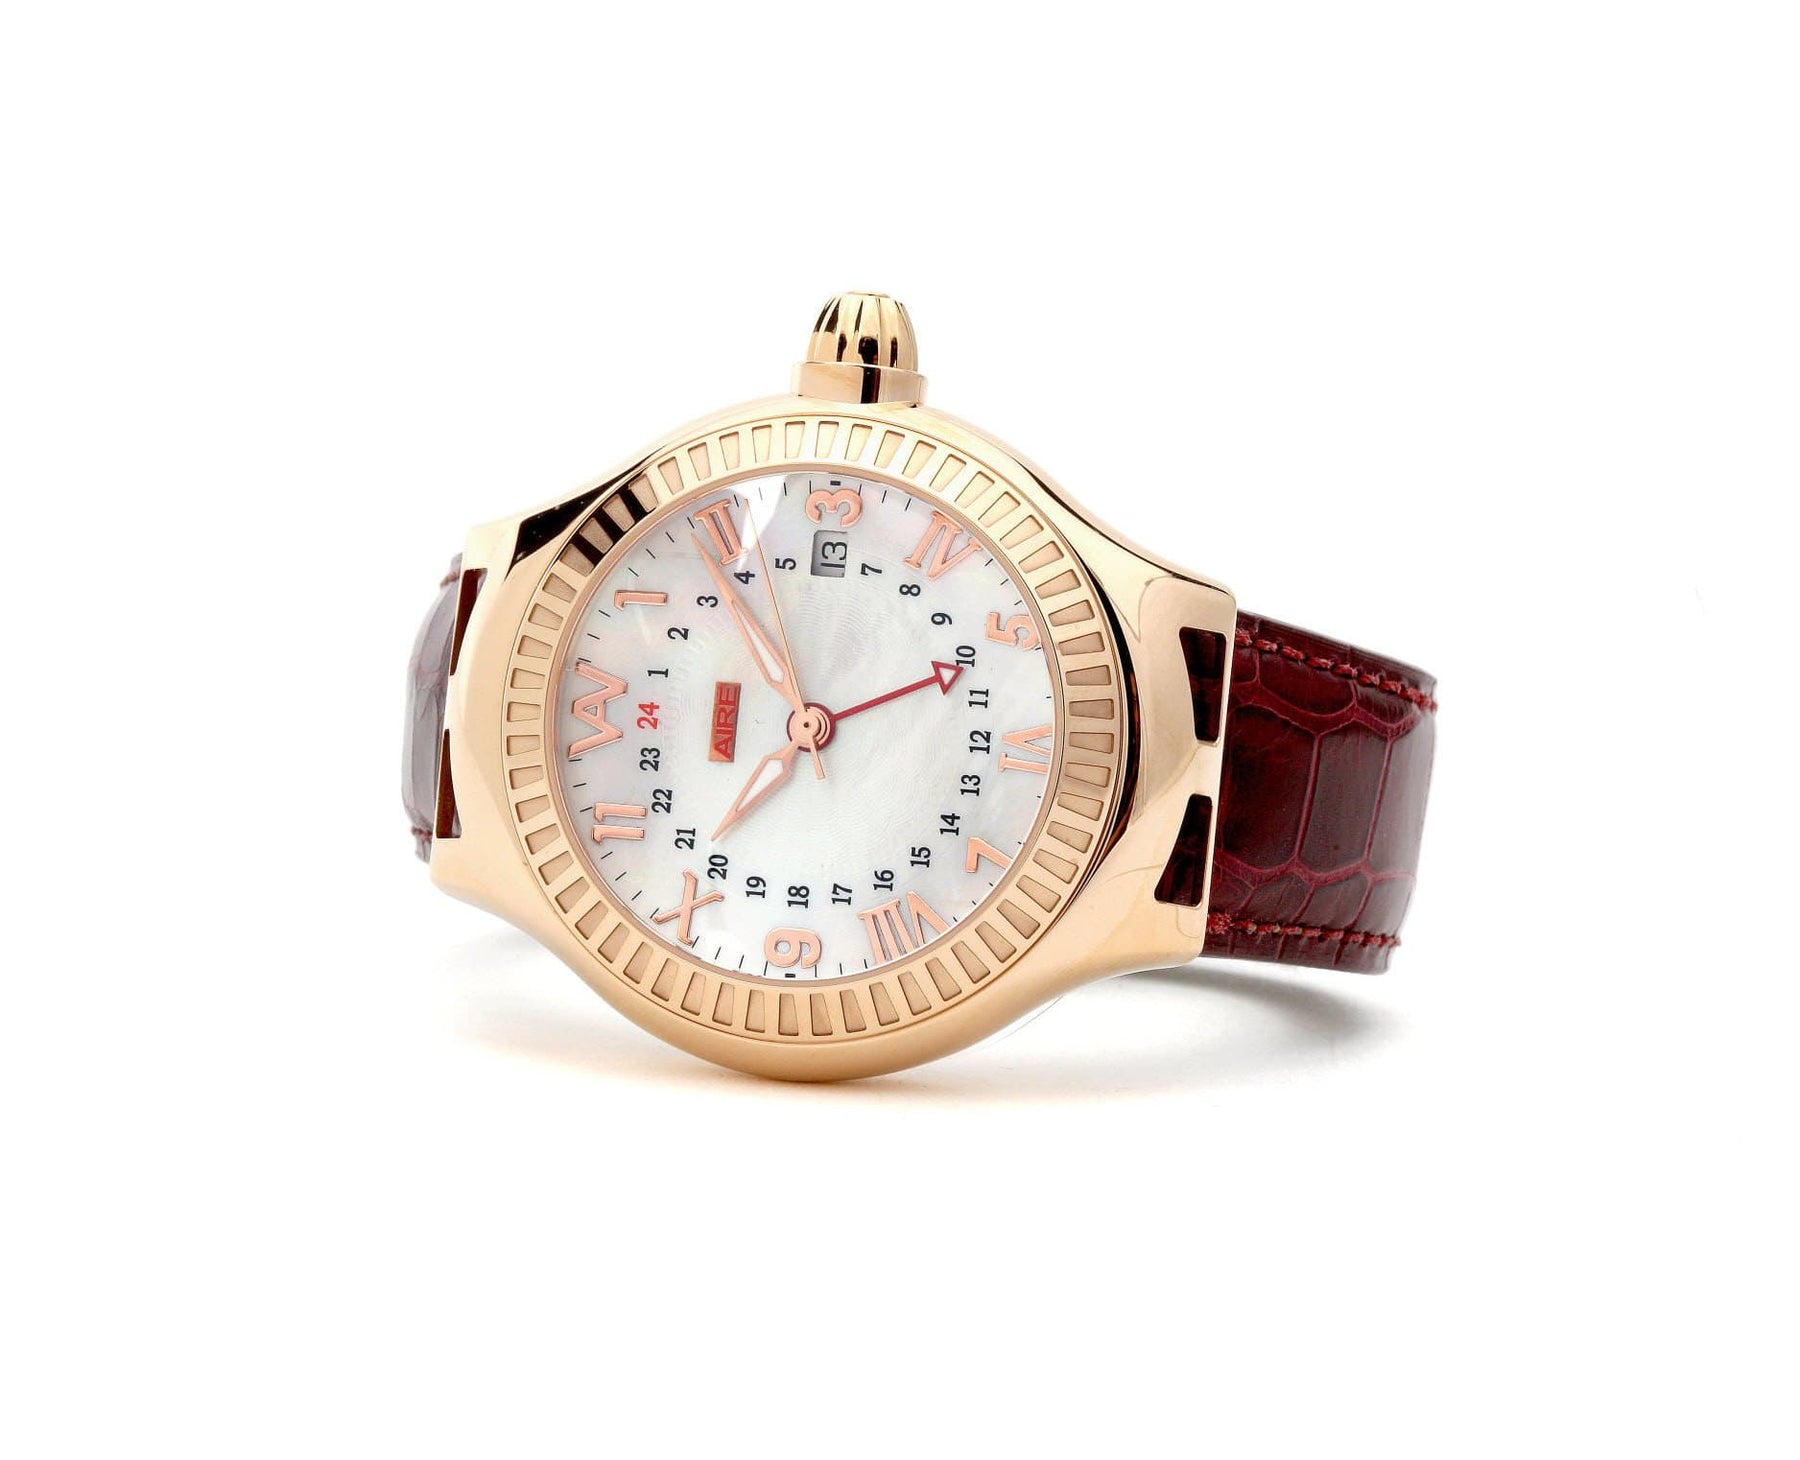 CHRIS AIRE WATCH -  PARLAY GMT - Chris Aire Fine Jewelry & Timepieces